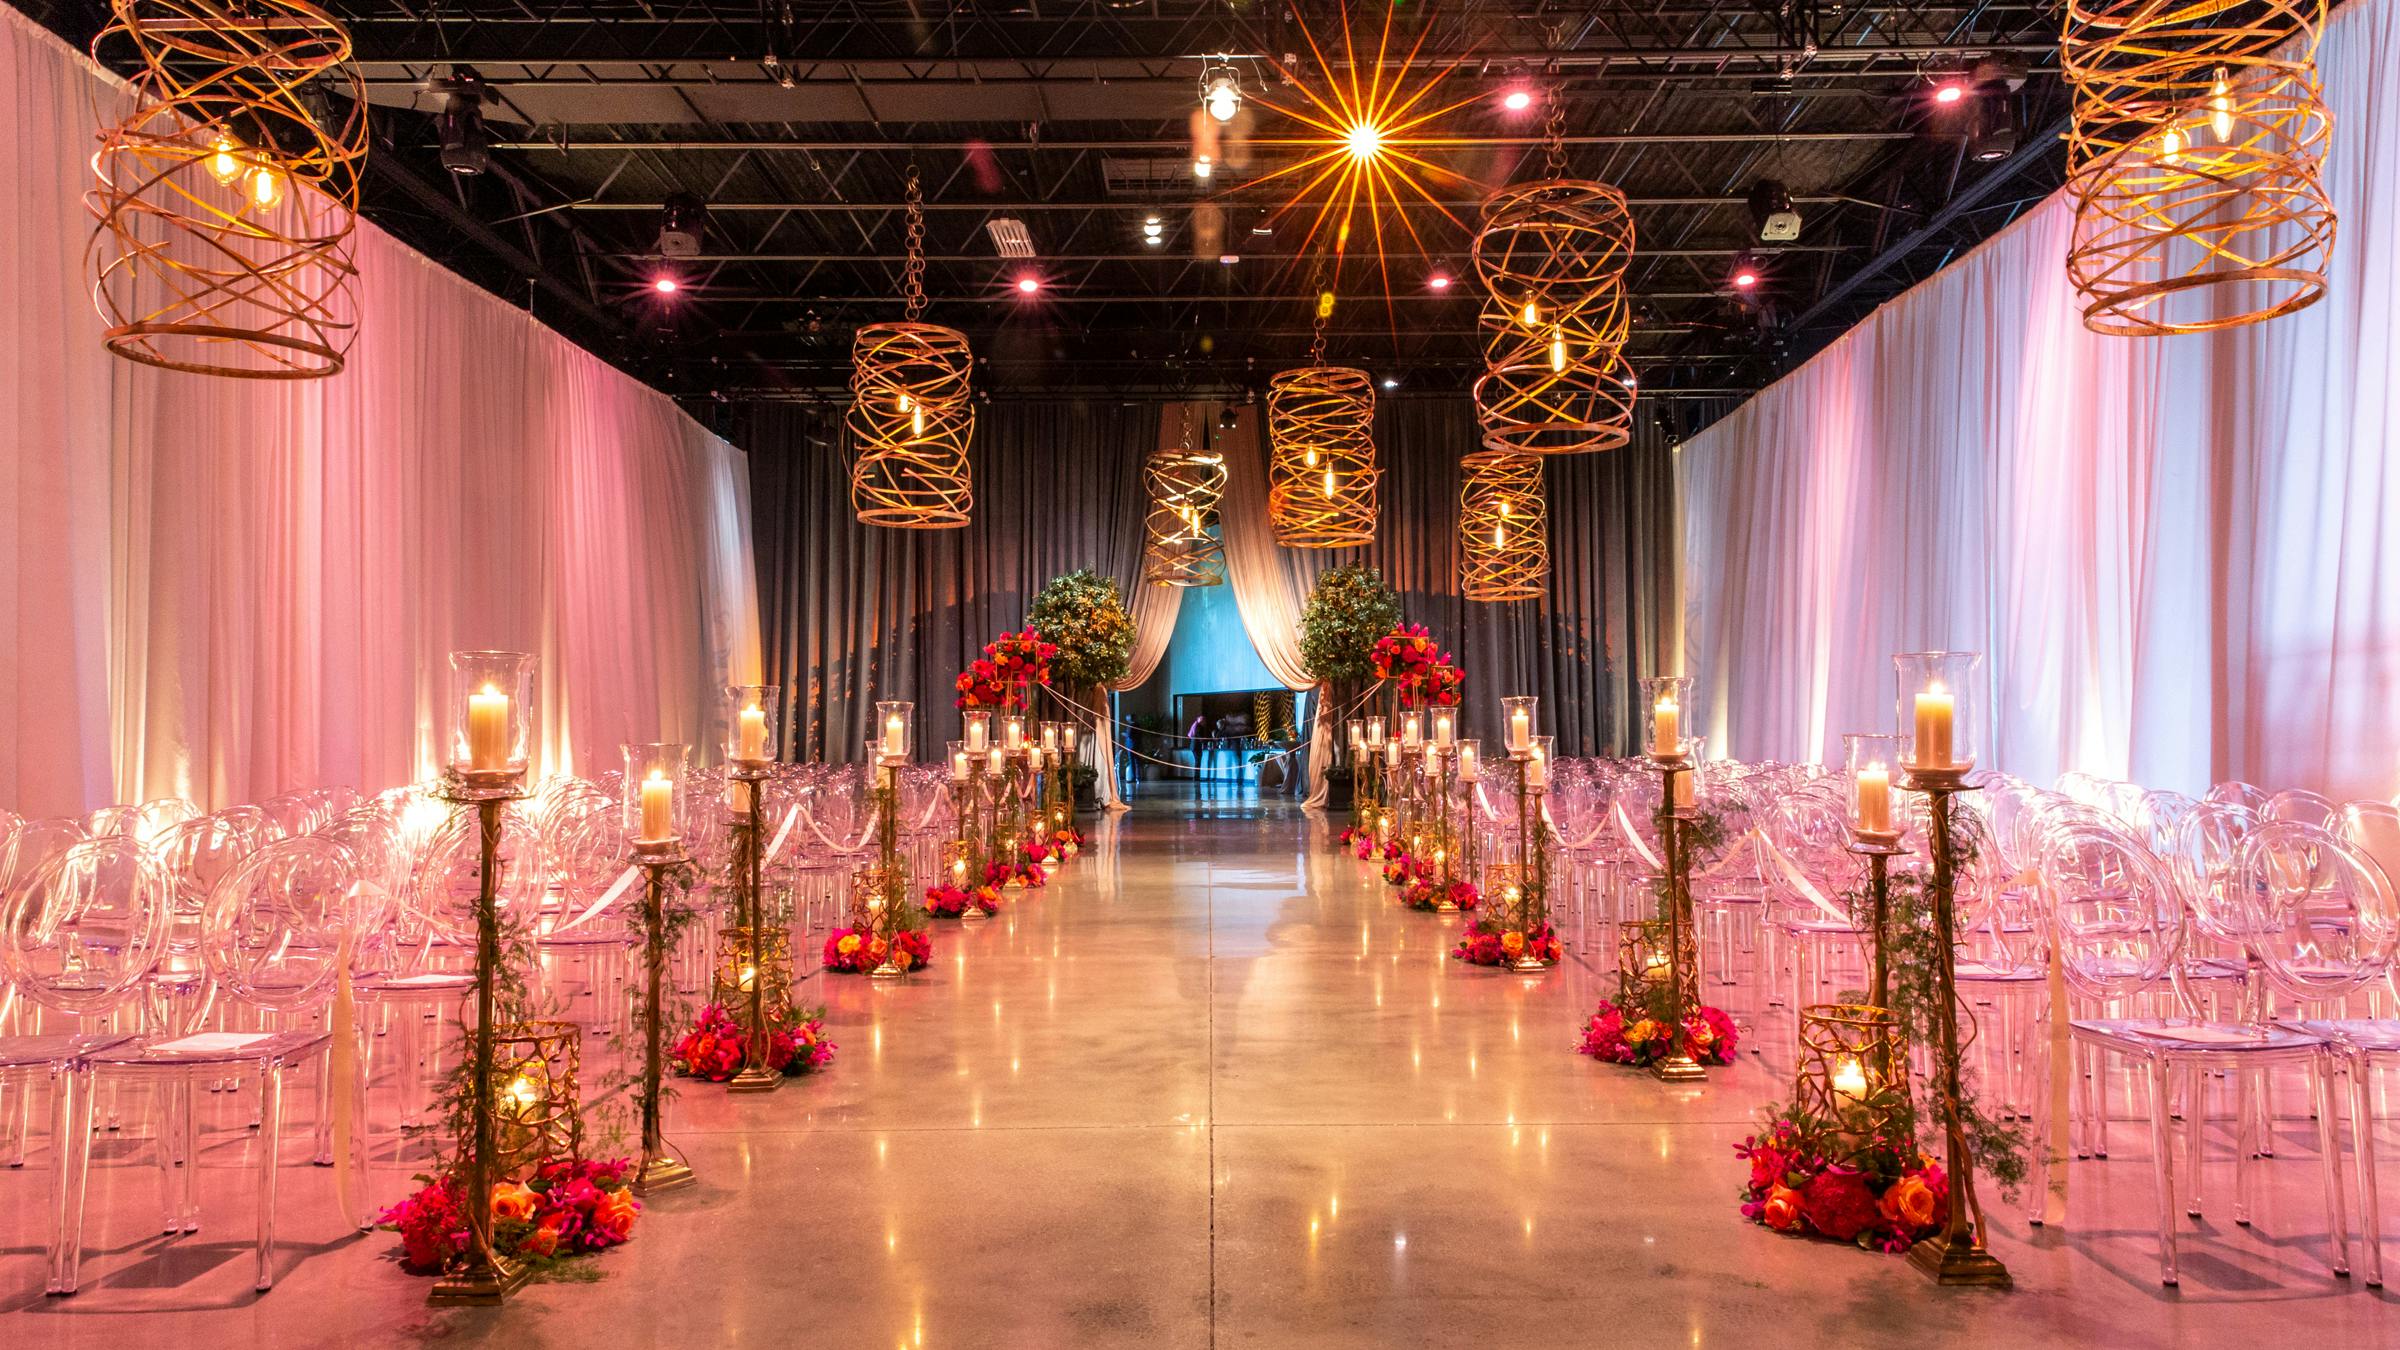 Bright + Punchy Wedding With Candle-Lit Wedding Aisle Décor